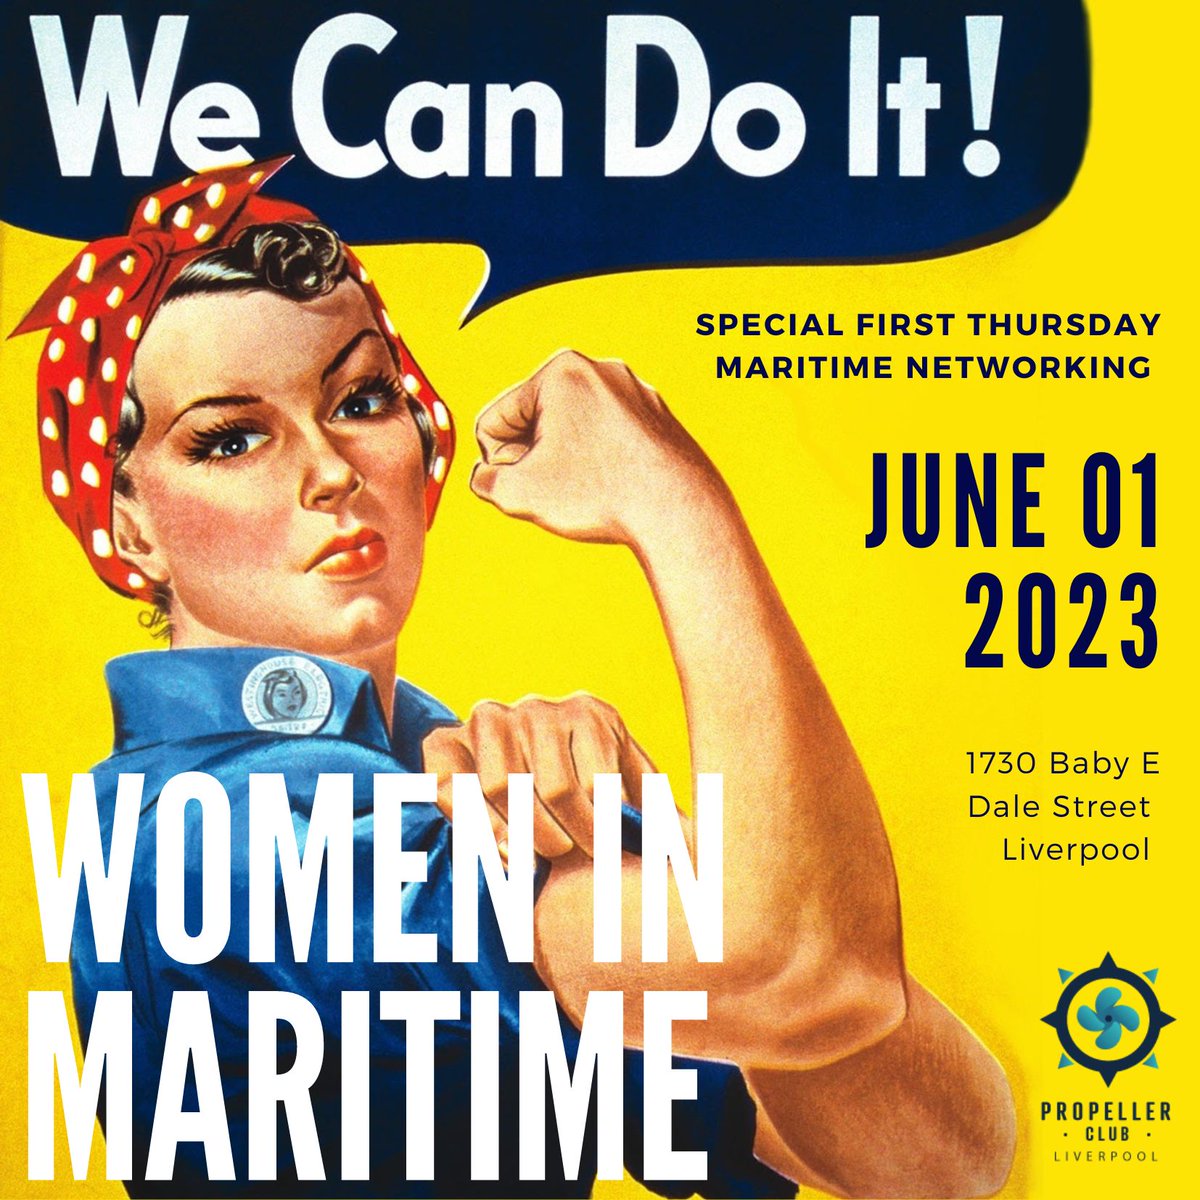 A super special #FirstThursday beckons as we celebrate #WomeninMaritime So come along, join us - bring your friends. Make it a fantastic night of maritime women (and yes the men who care and want them to succeed are welcome too)... Let's make this wonderful!